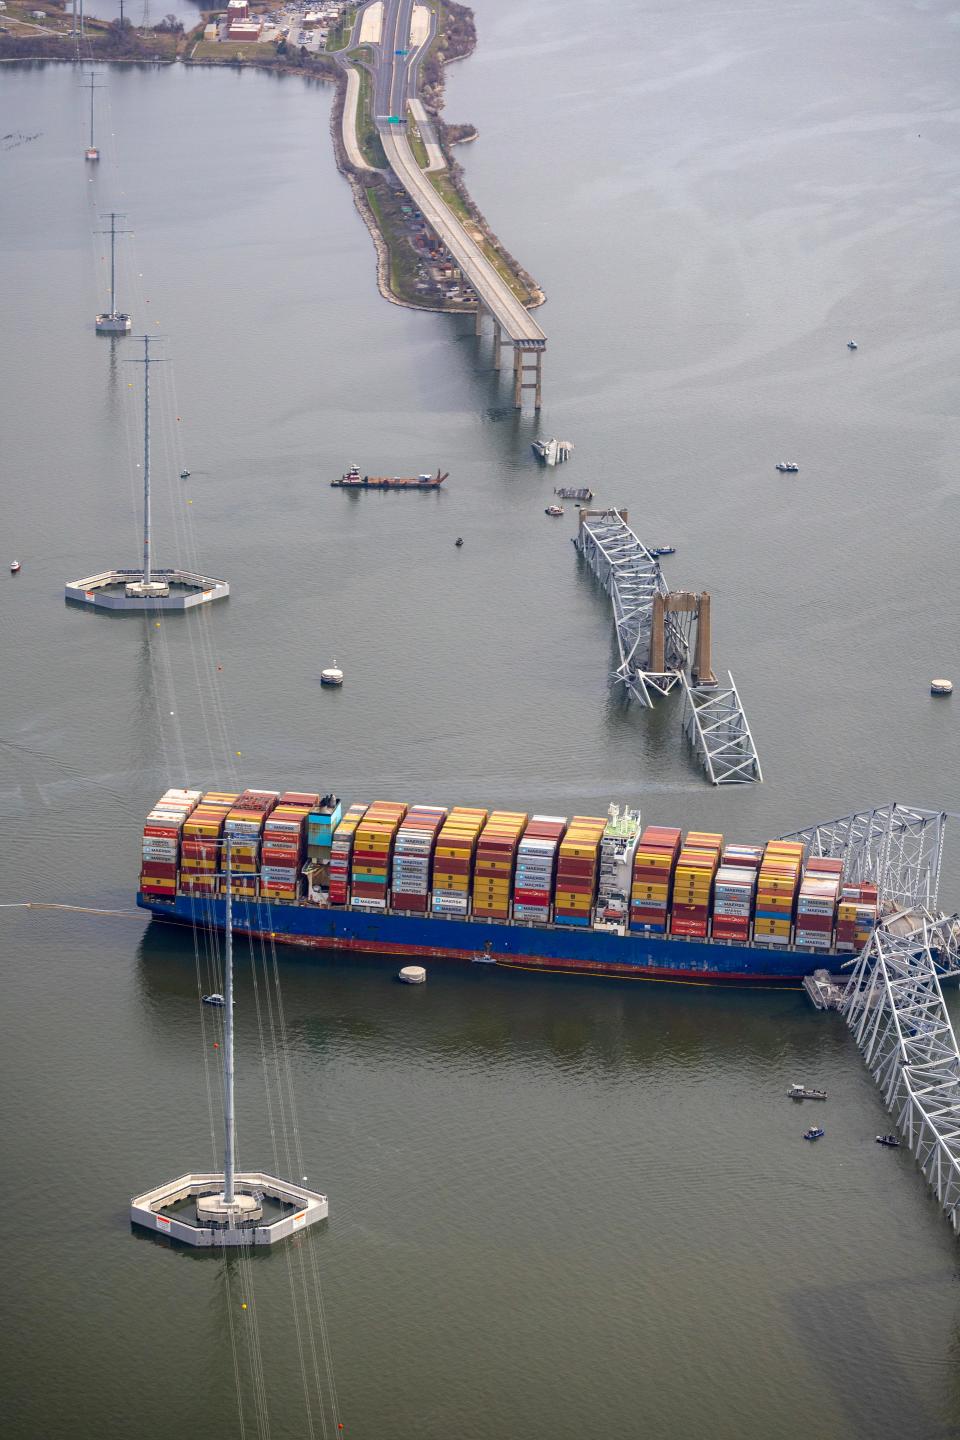 An aerial view of the cargo ship Dali in the wreckage of the Francis Scott Key Bridge in Baltimore.